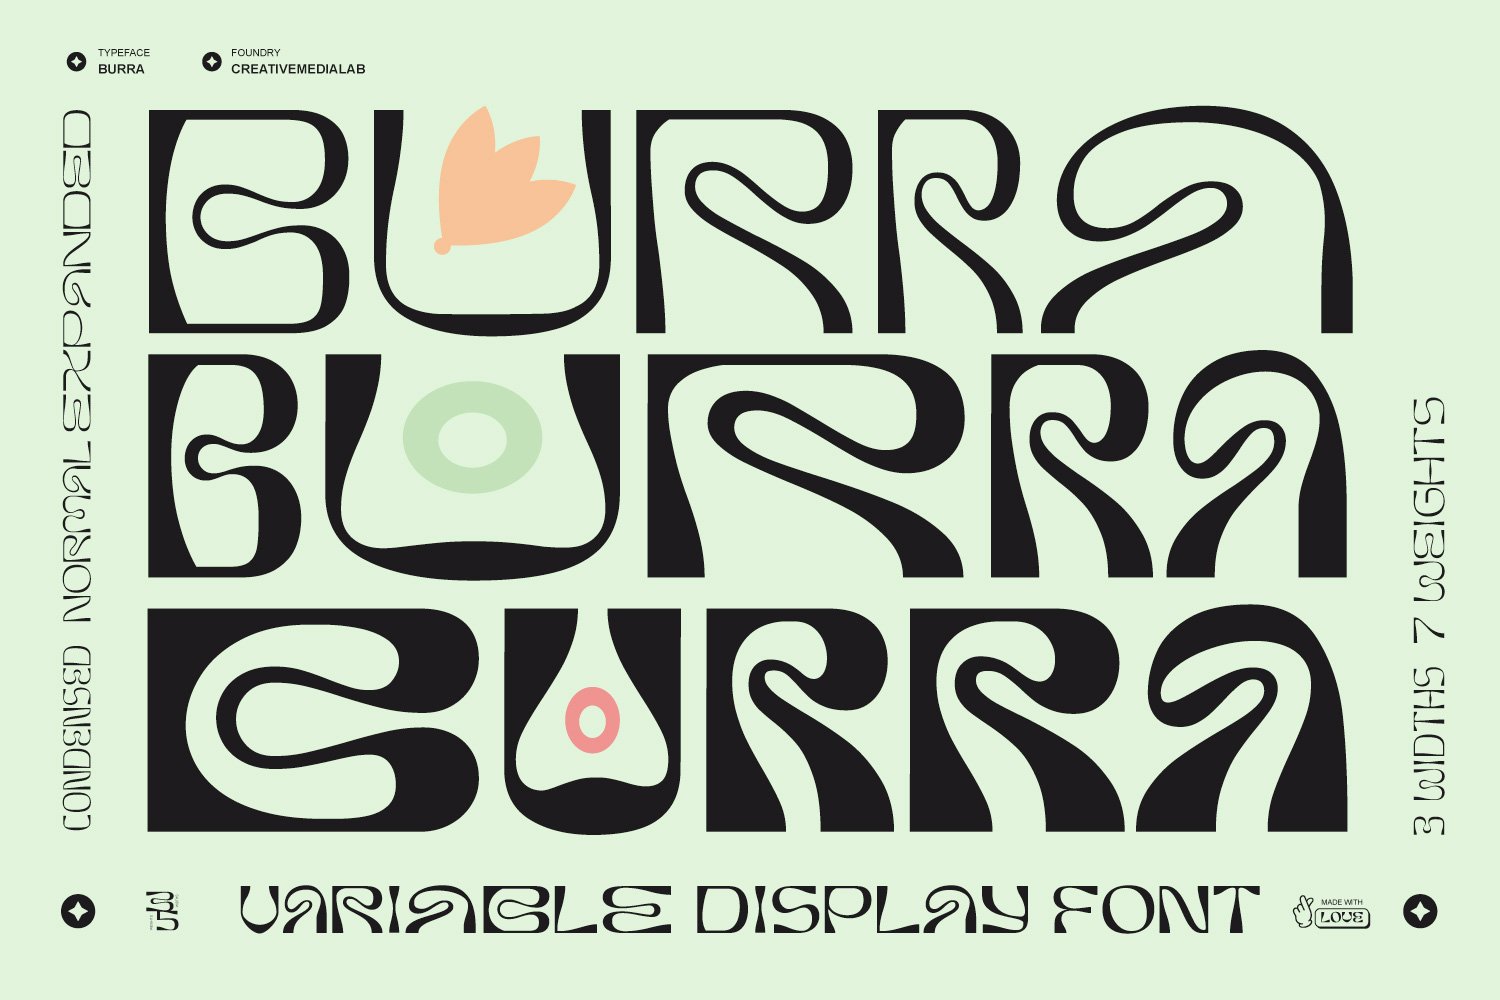 Burra - Psychedelic font cover image.